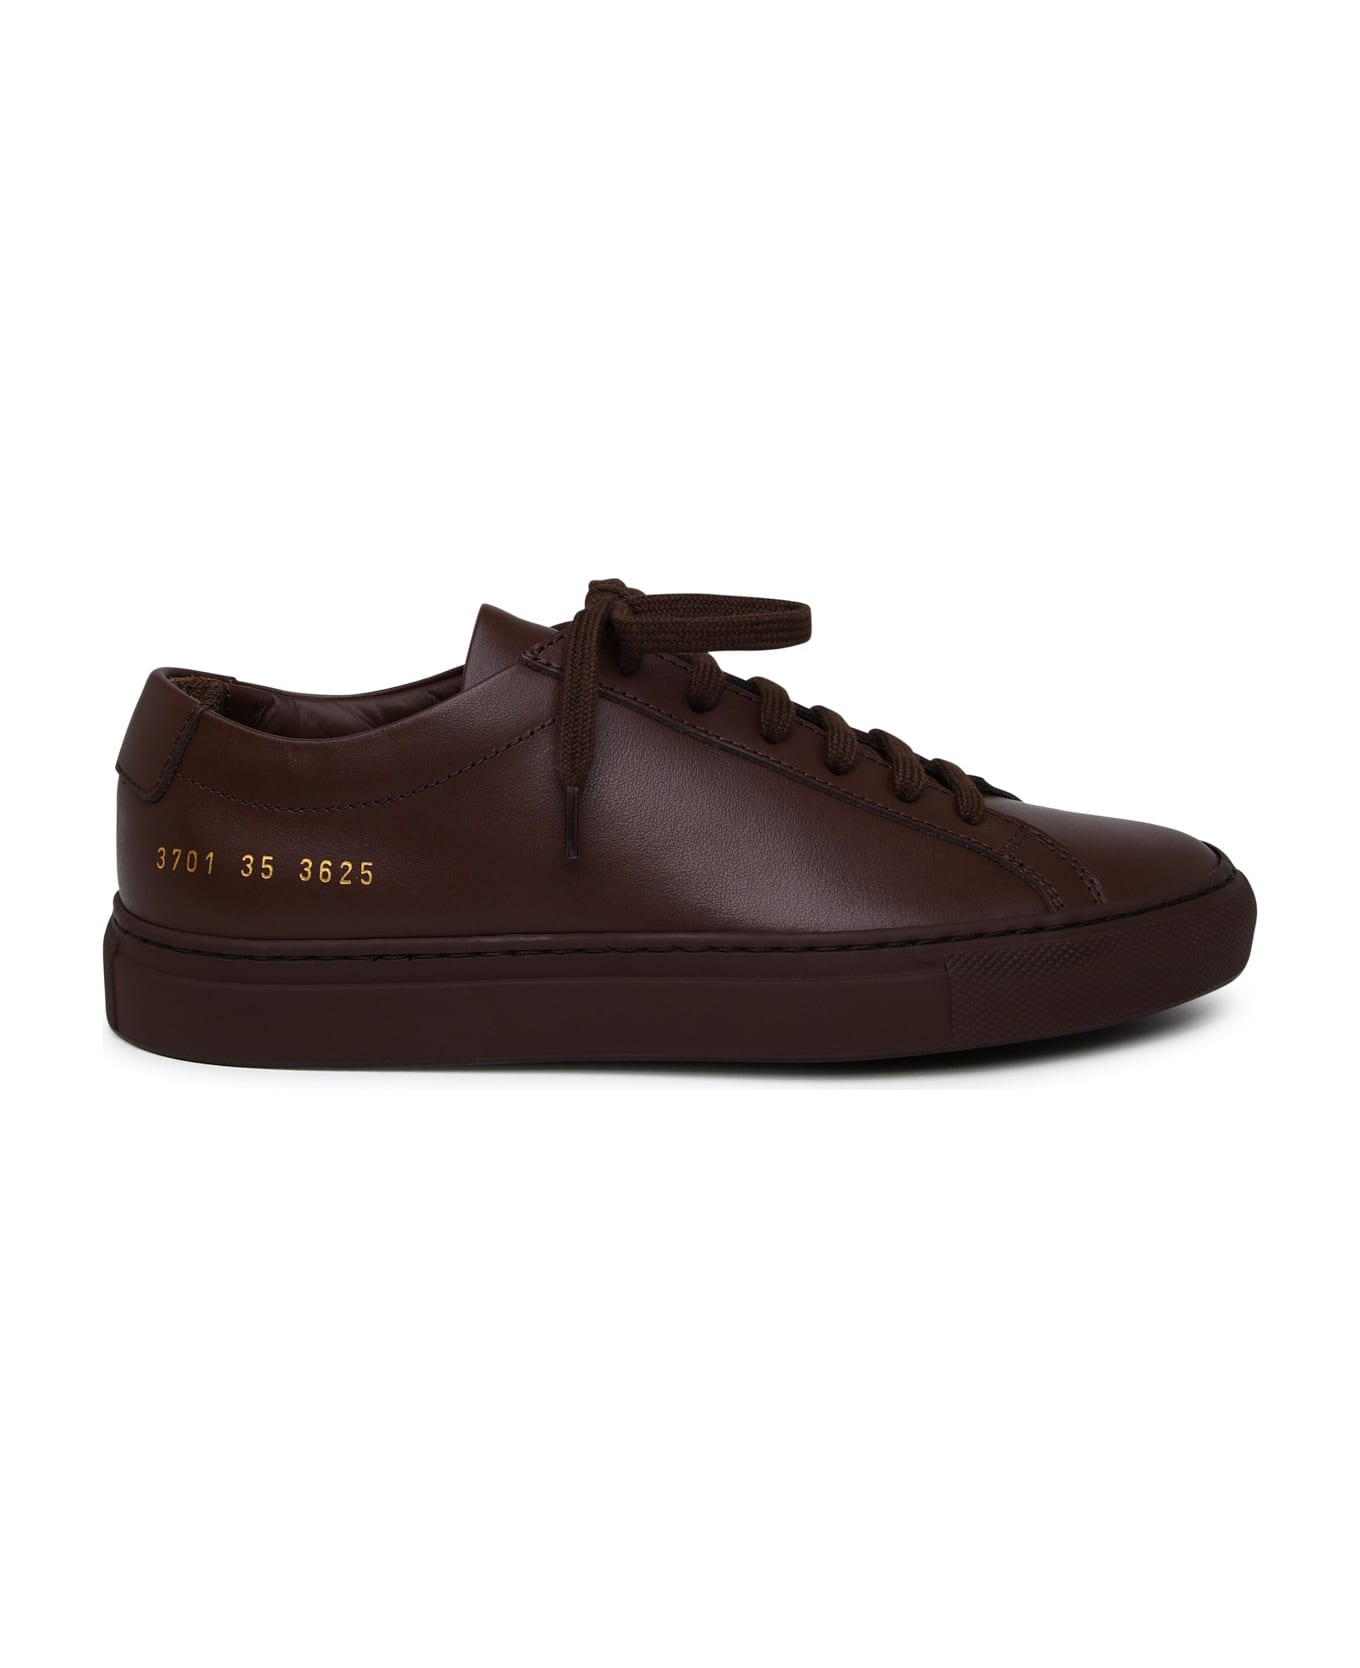 Common Projects Achilles Brown Leather Sneakers - Brown